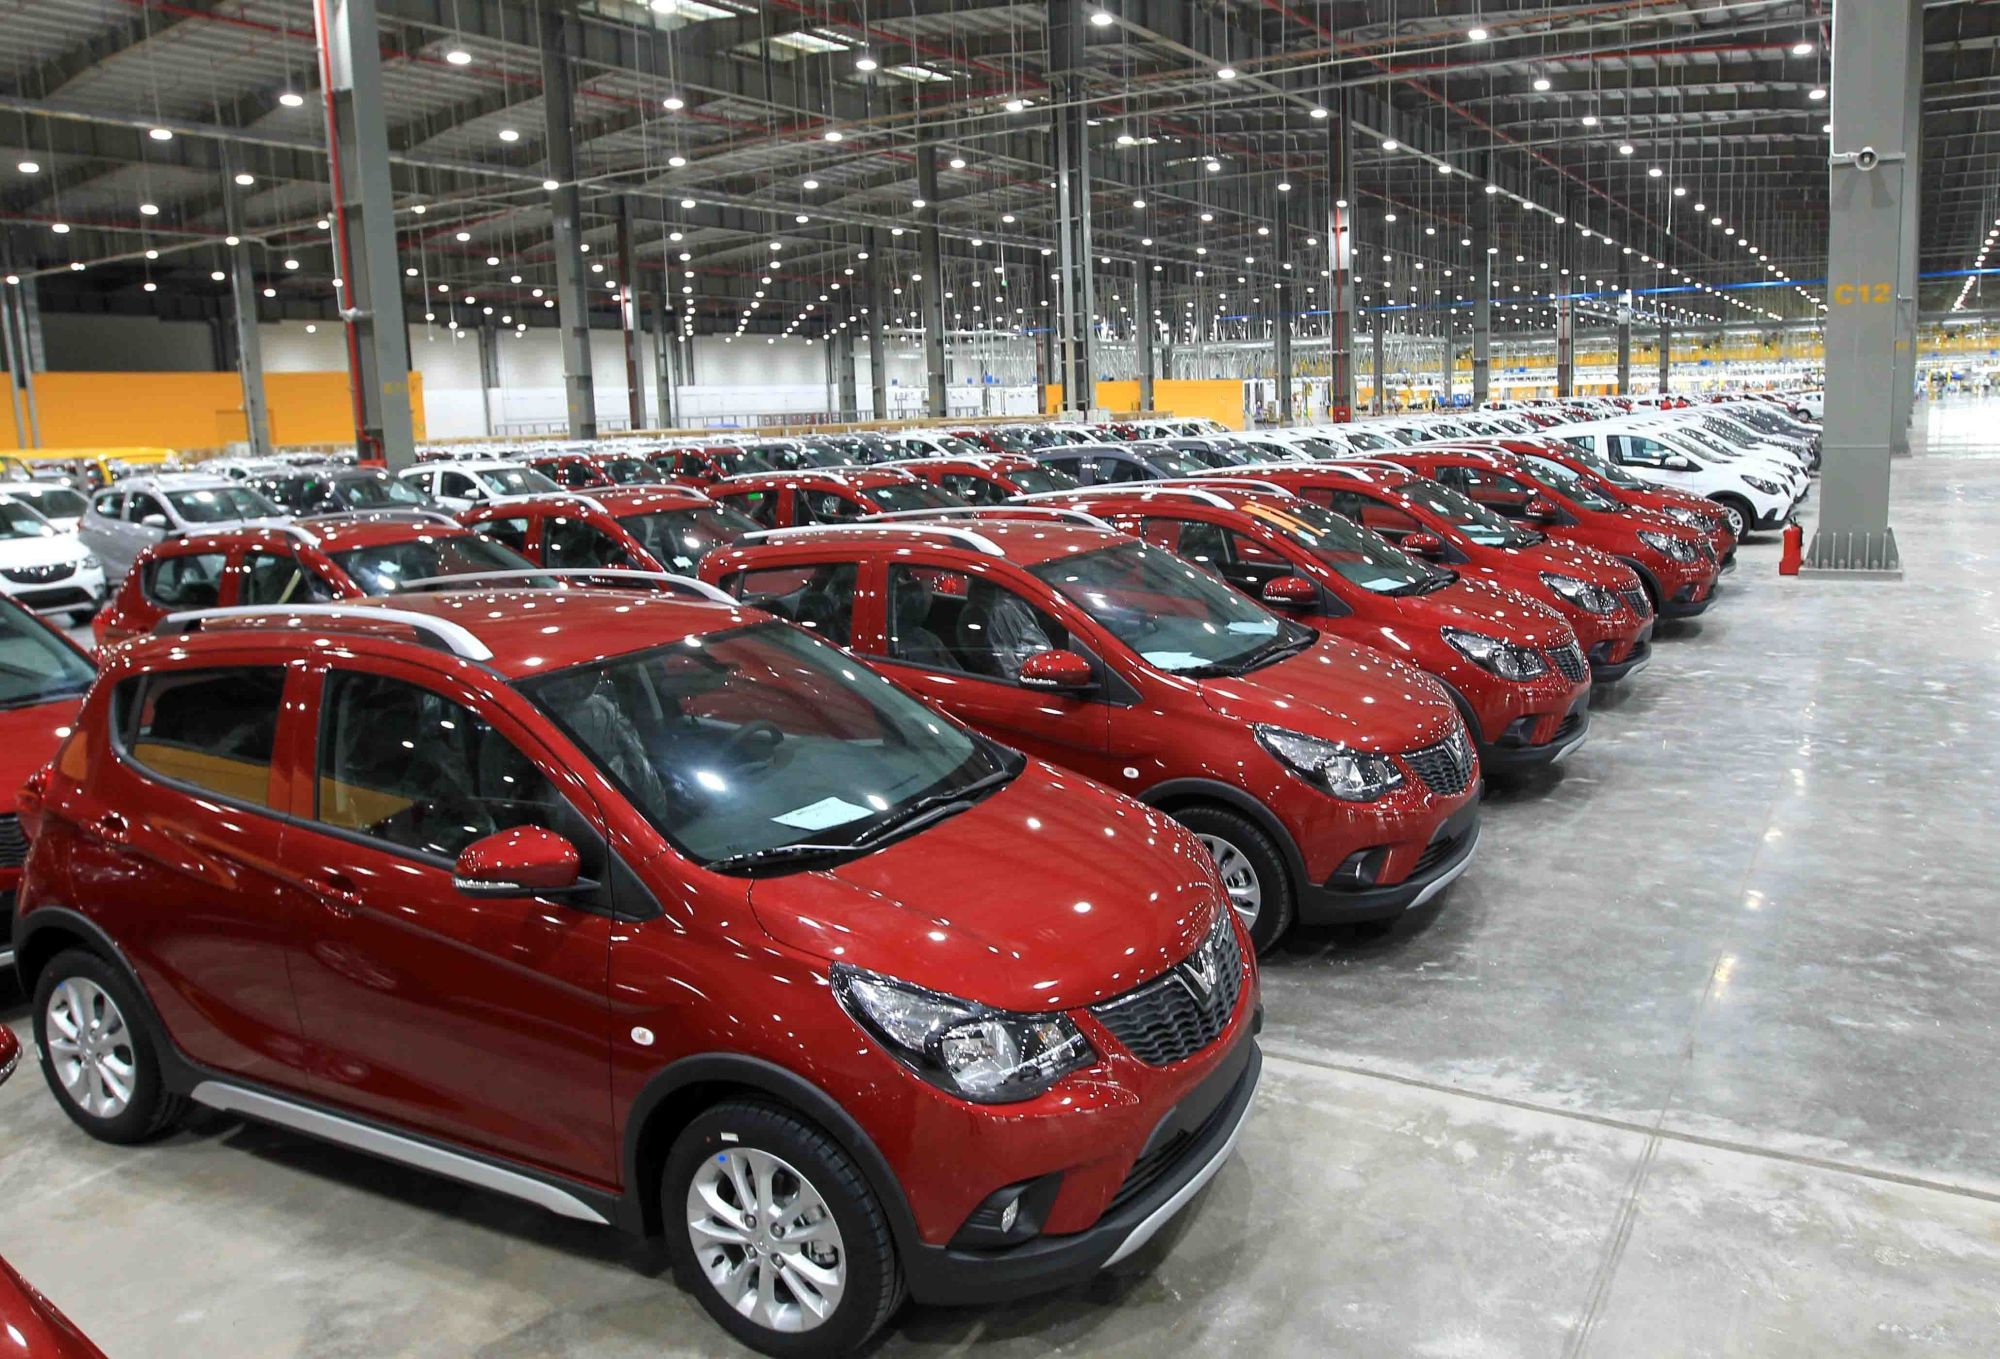 Every VinFast-branded car is the pride of ATTS Vietnam (Autotech)